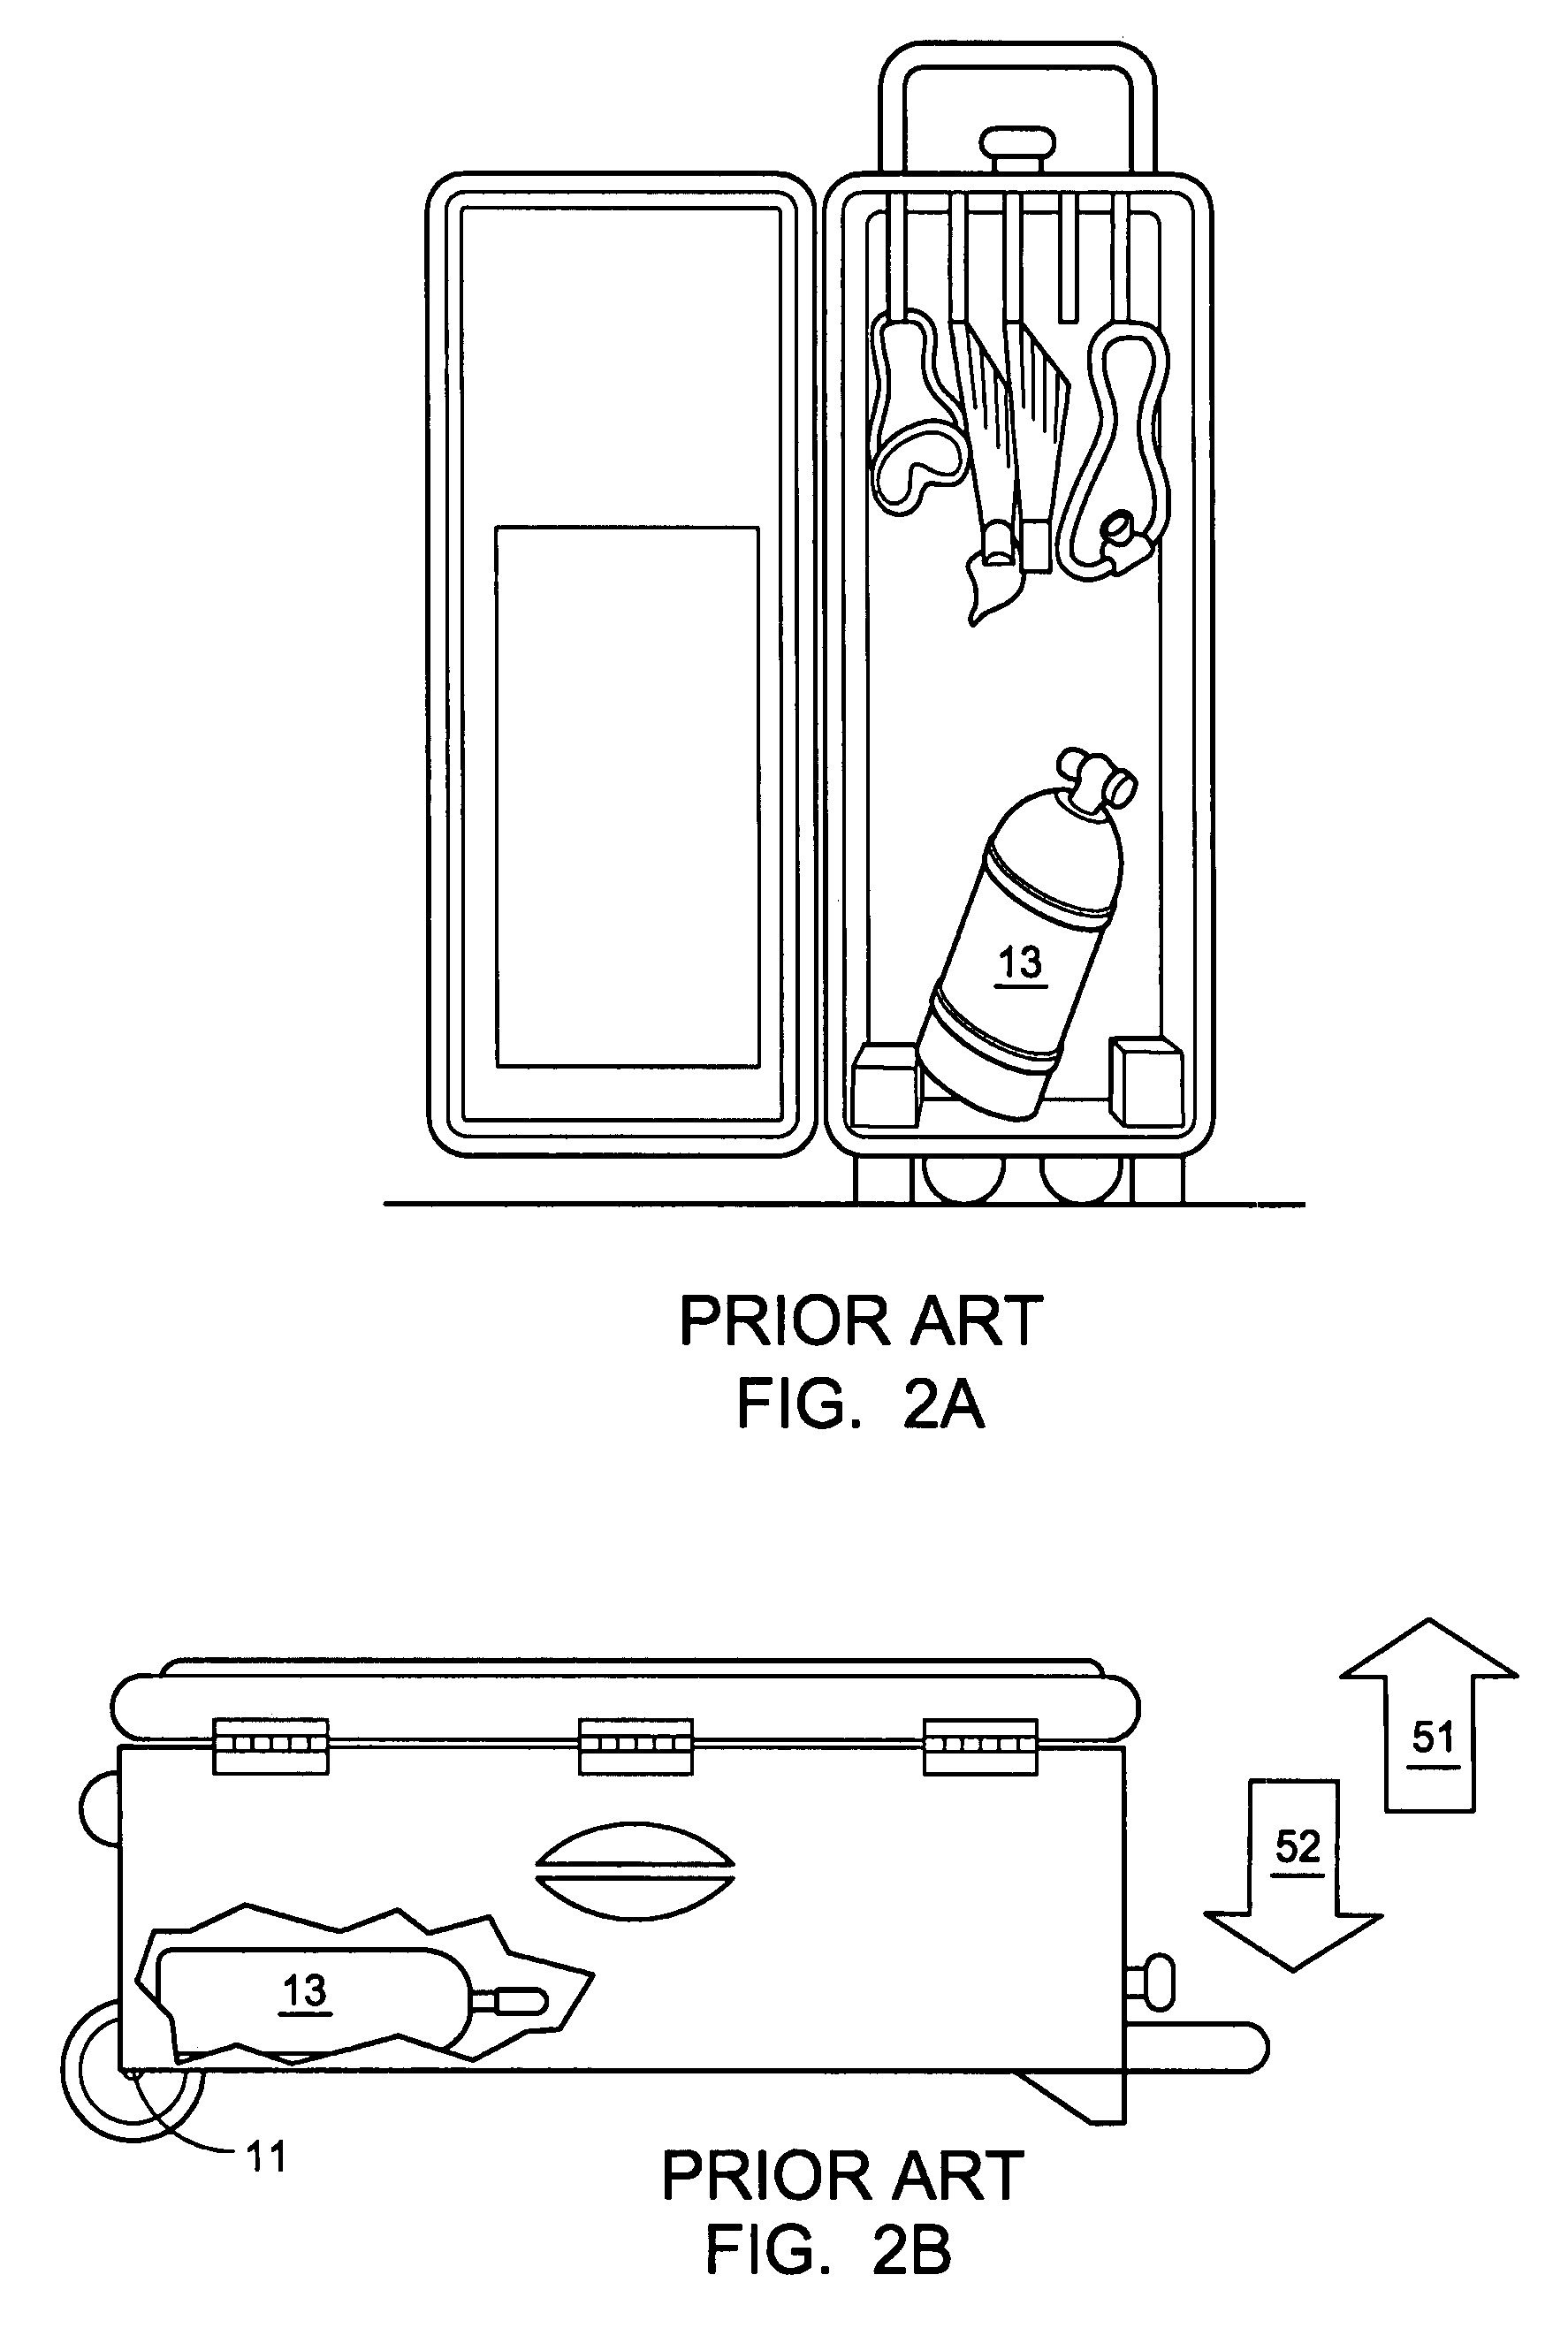 Tote device having a distributed weight load for reducing the total weight load borne by a user